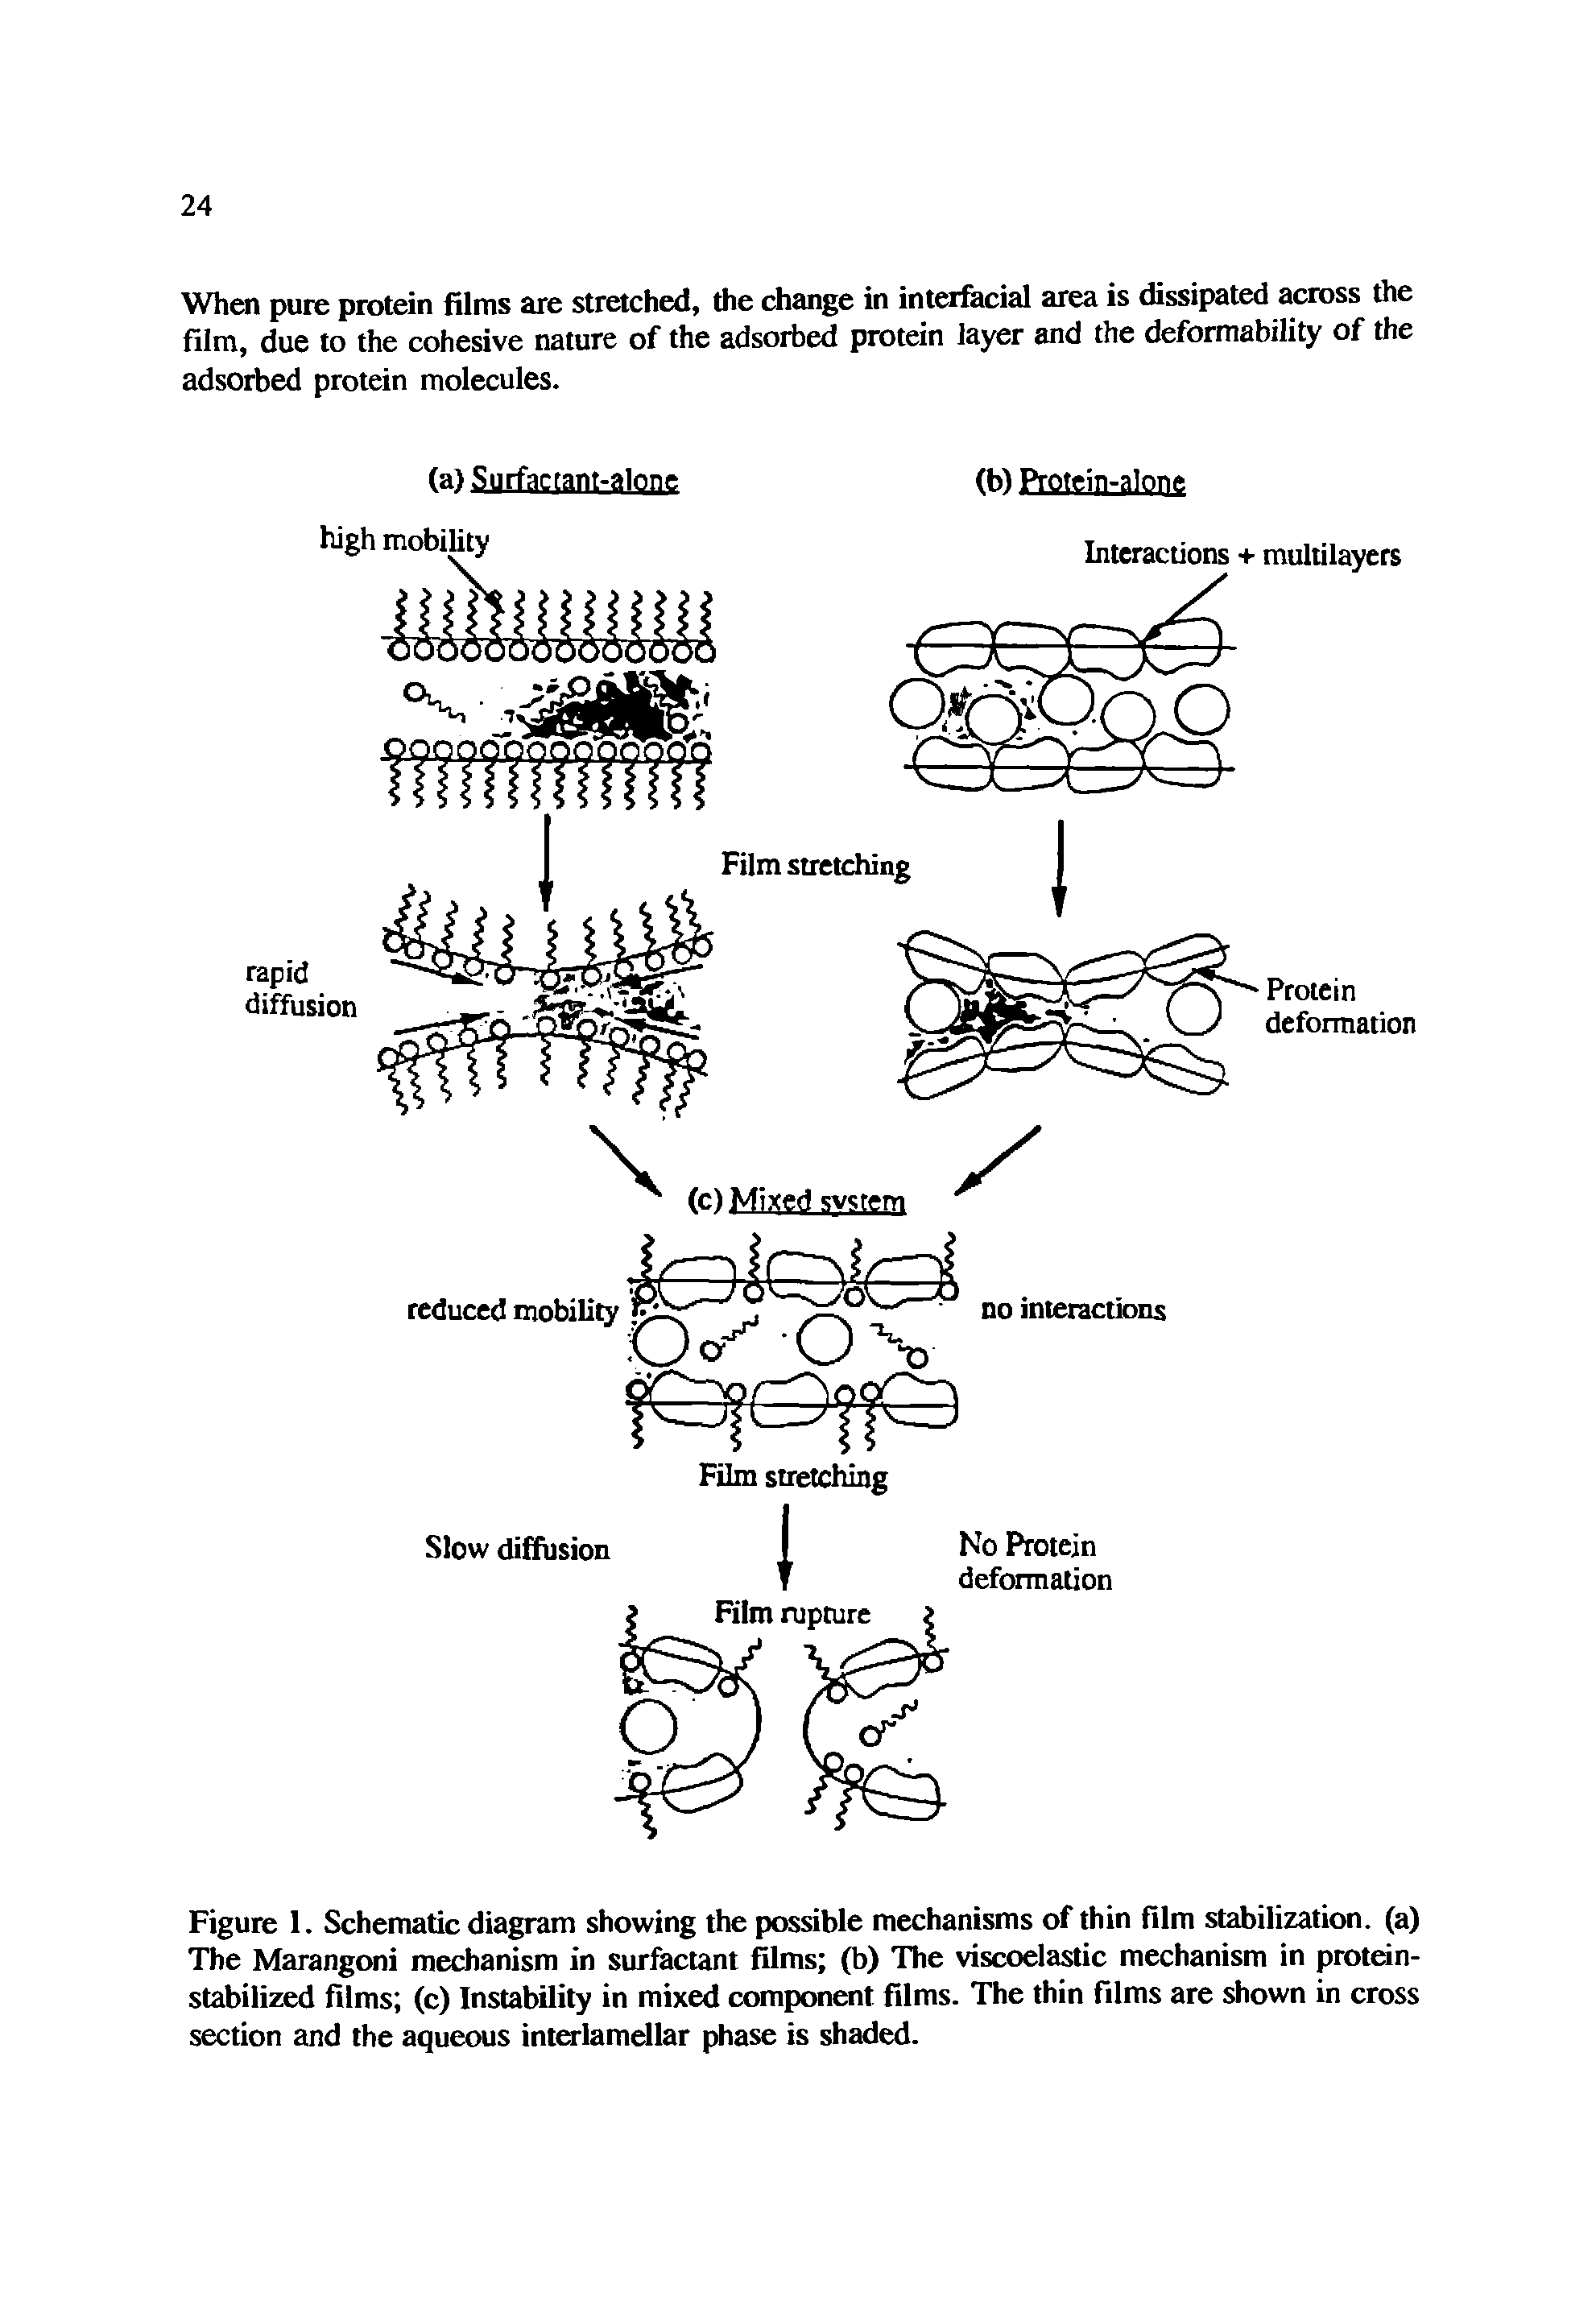 Figure 1. Schematic diagram showing the possible mechanisms of thin film stabilization, (a) The Marangoni mechanism in surfactant films (b) The viscoelastic mechanism in protein-stabilized films (c) Instability in mixed component films. The thin films are shown in cross section and the aqueous interlamellar phase is shaded.